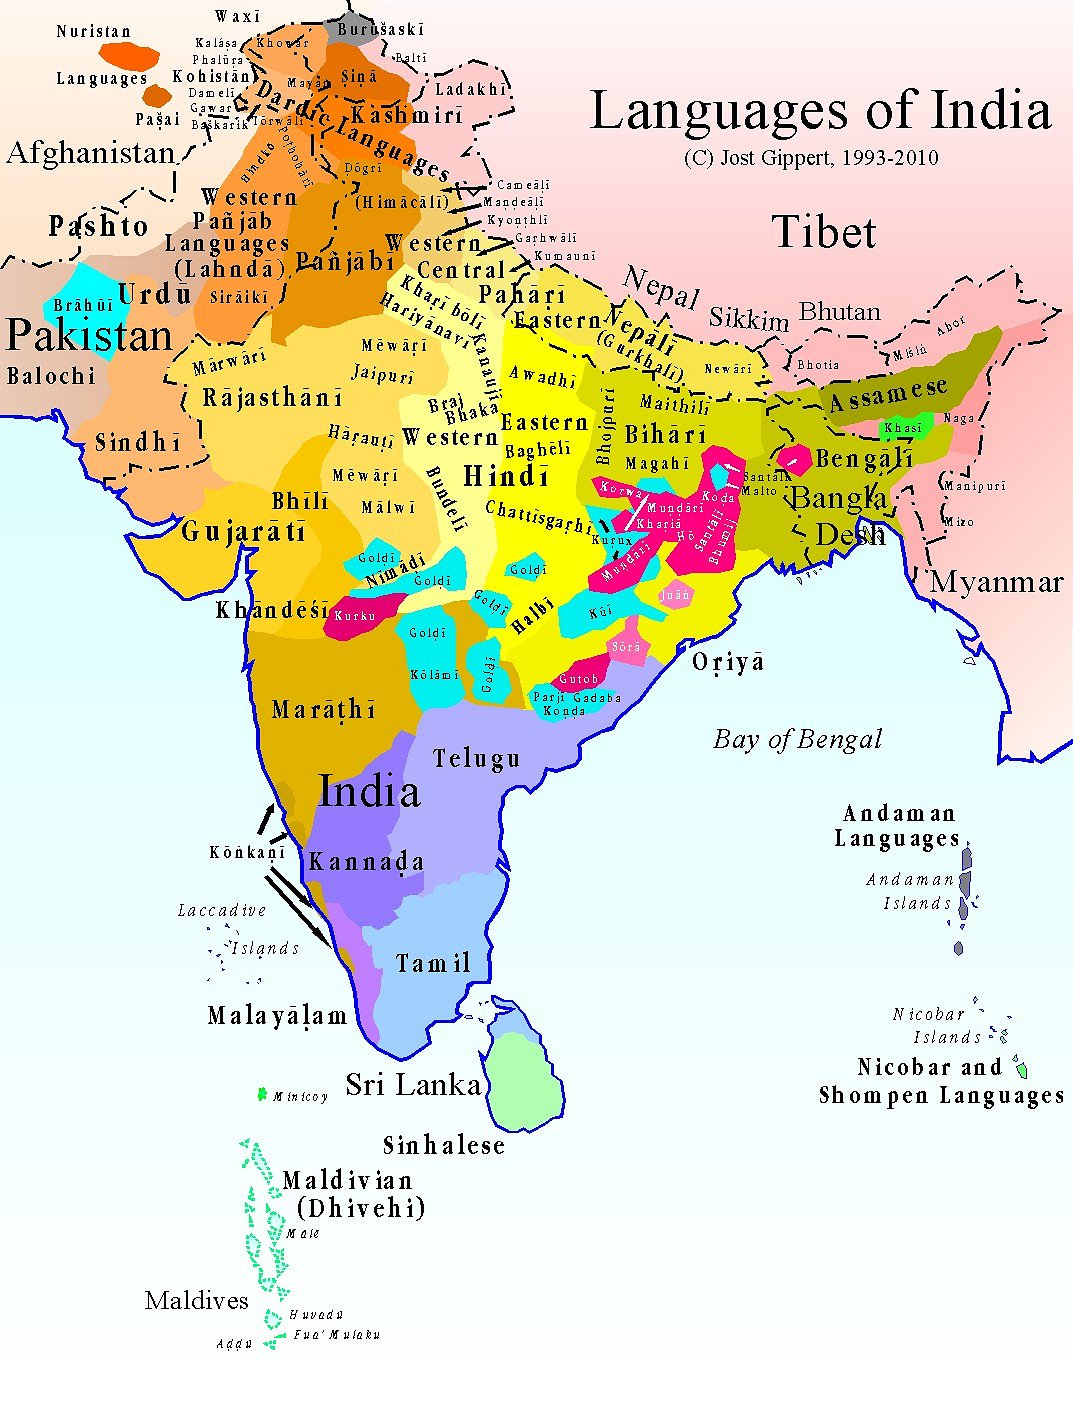 Most Dravidian languages are spoken in South India, with the exception of Brahui, which is spoken in Pakistan.